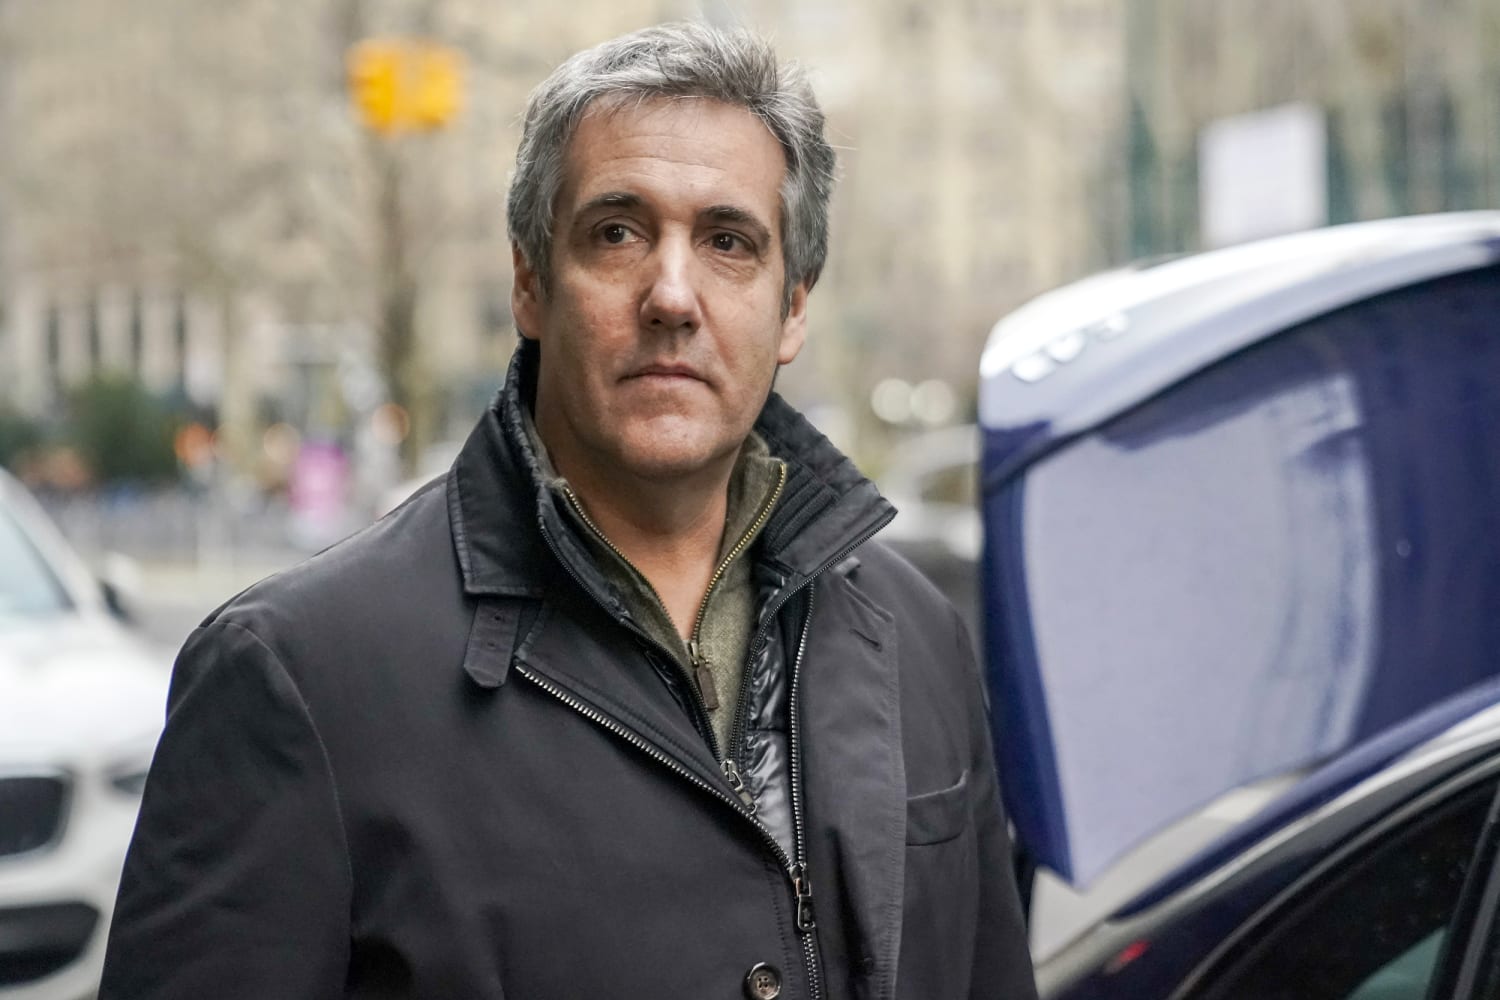 Michael Cohen's lawyer says he'd be a 'principal witness' in Trump trial